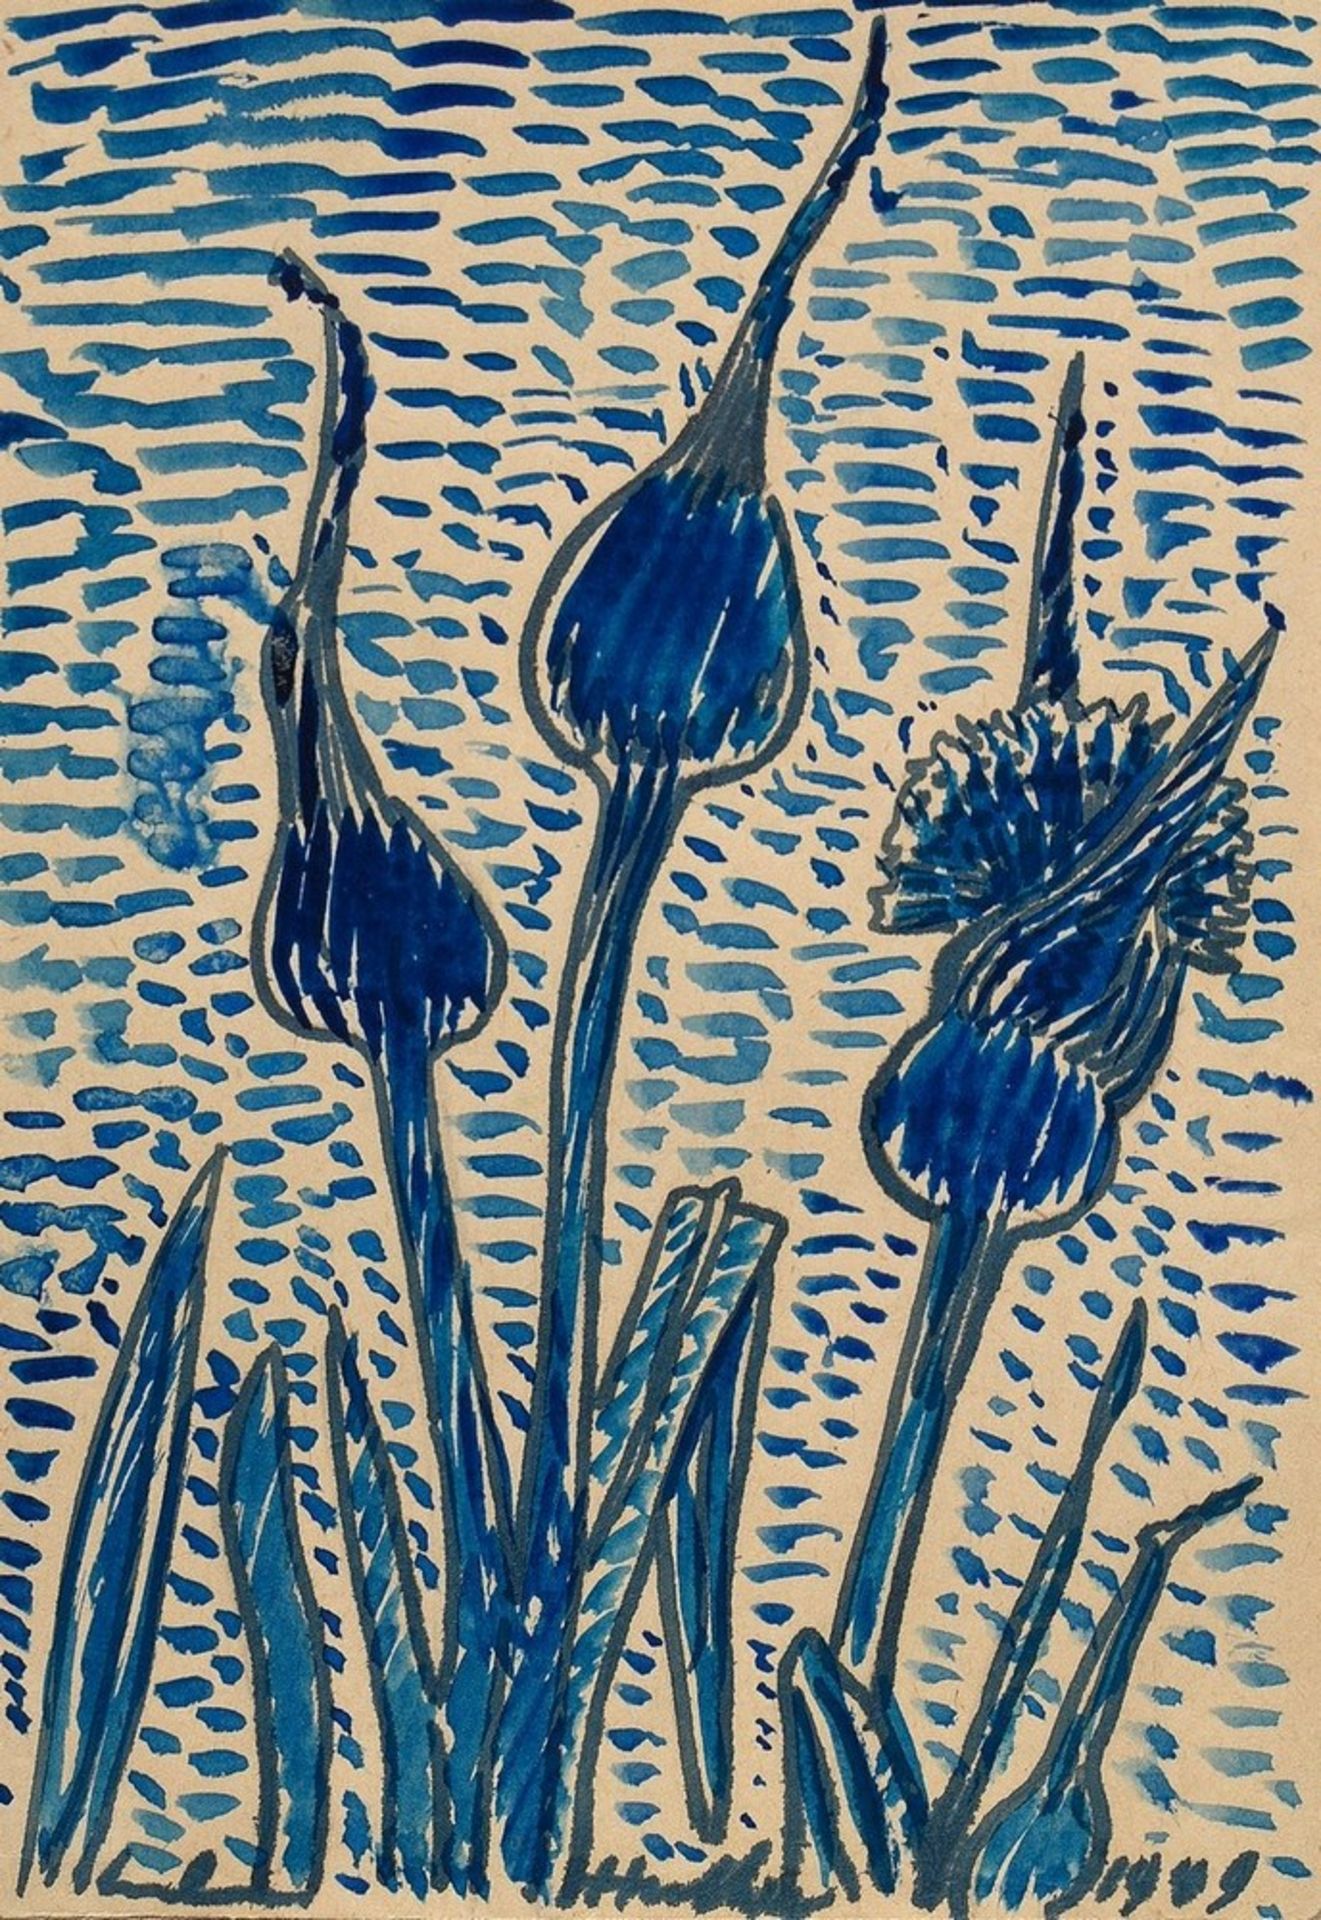 Hüther, Julius (1881-1954) 'Flowers', ink, sign. and dat. below, mounted on paper, 14.8x10.4cm (29.